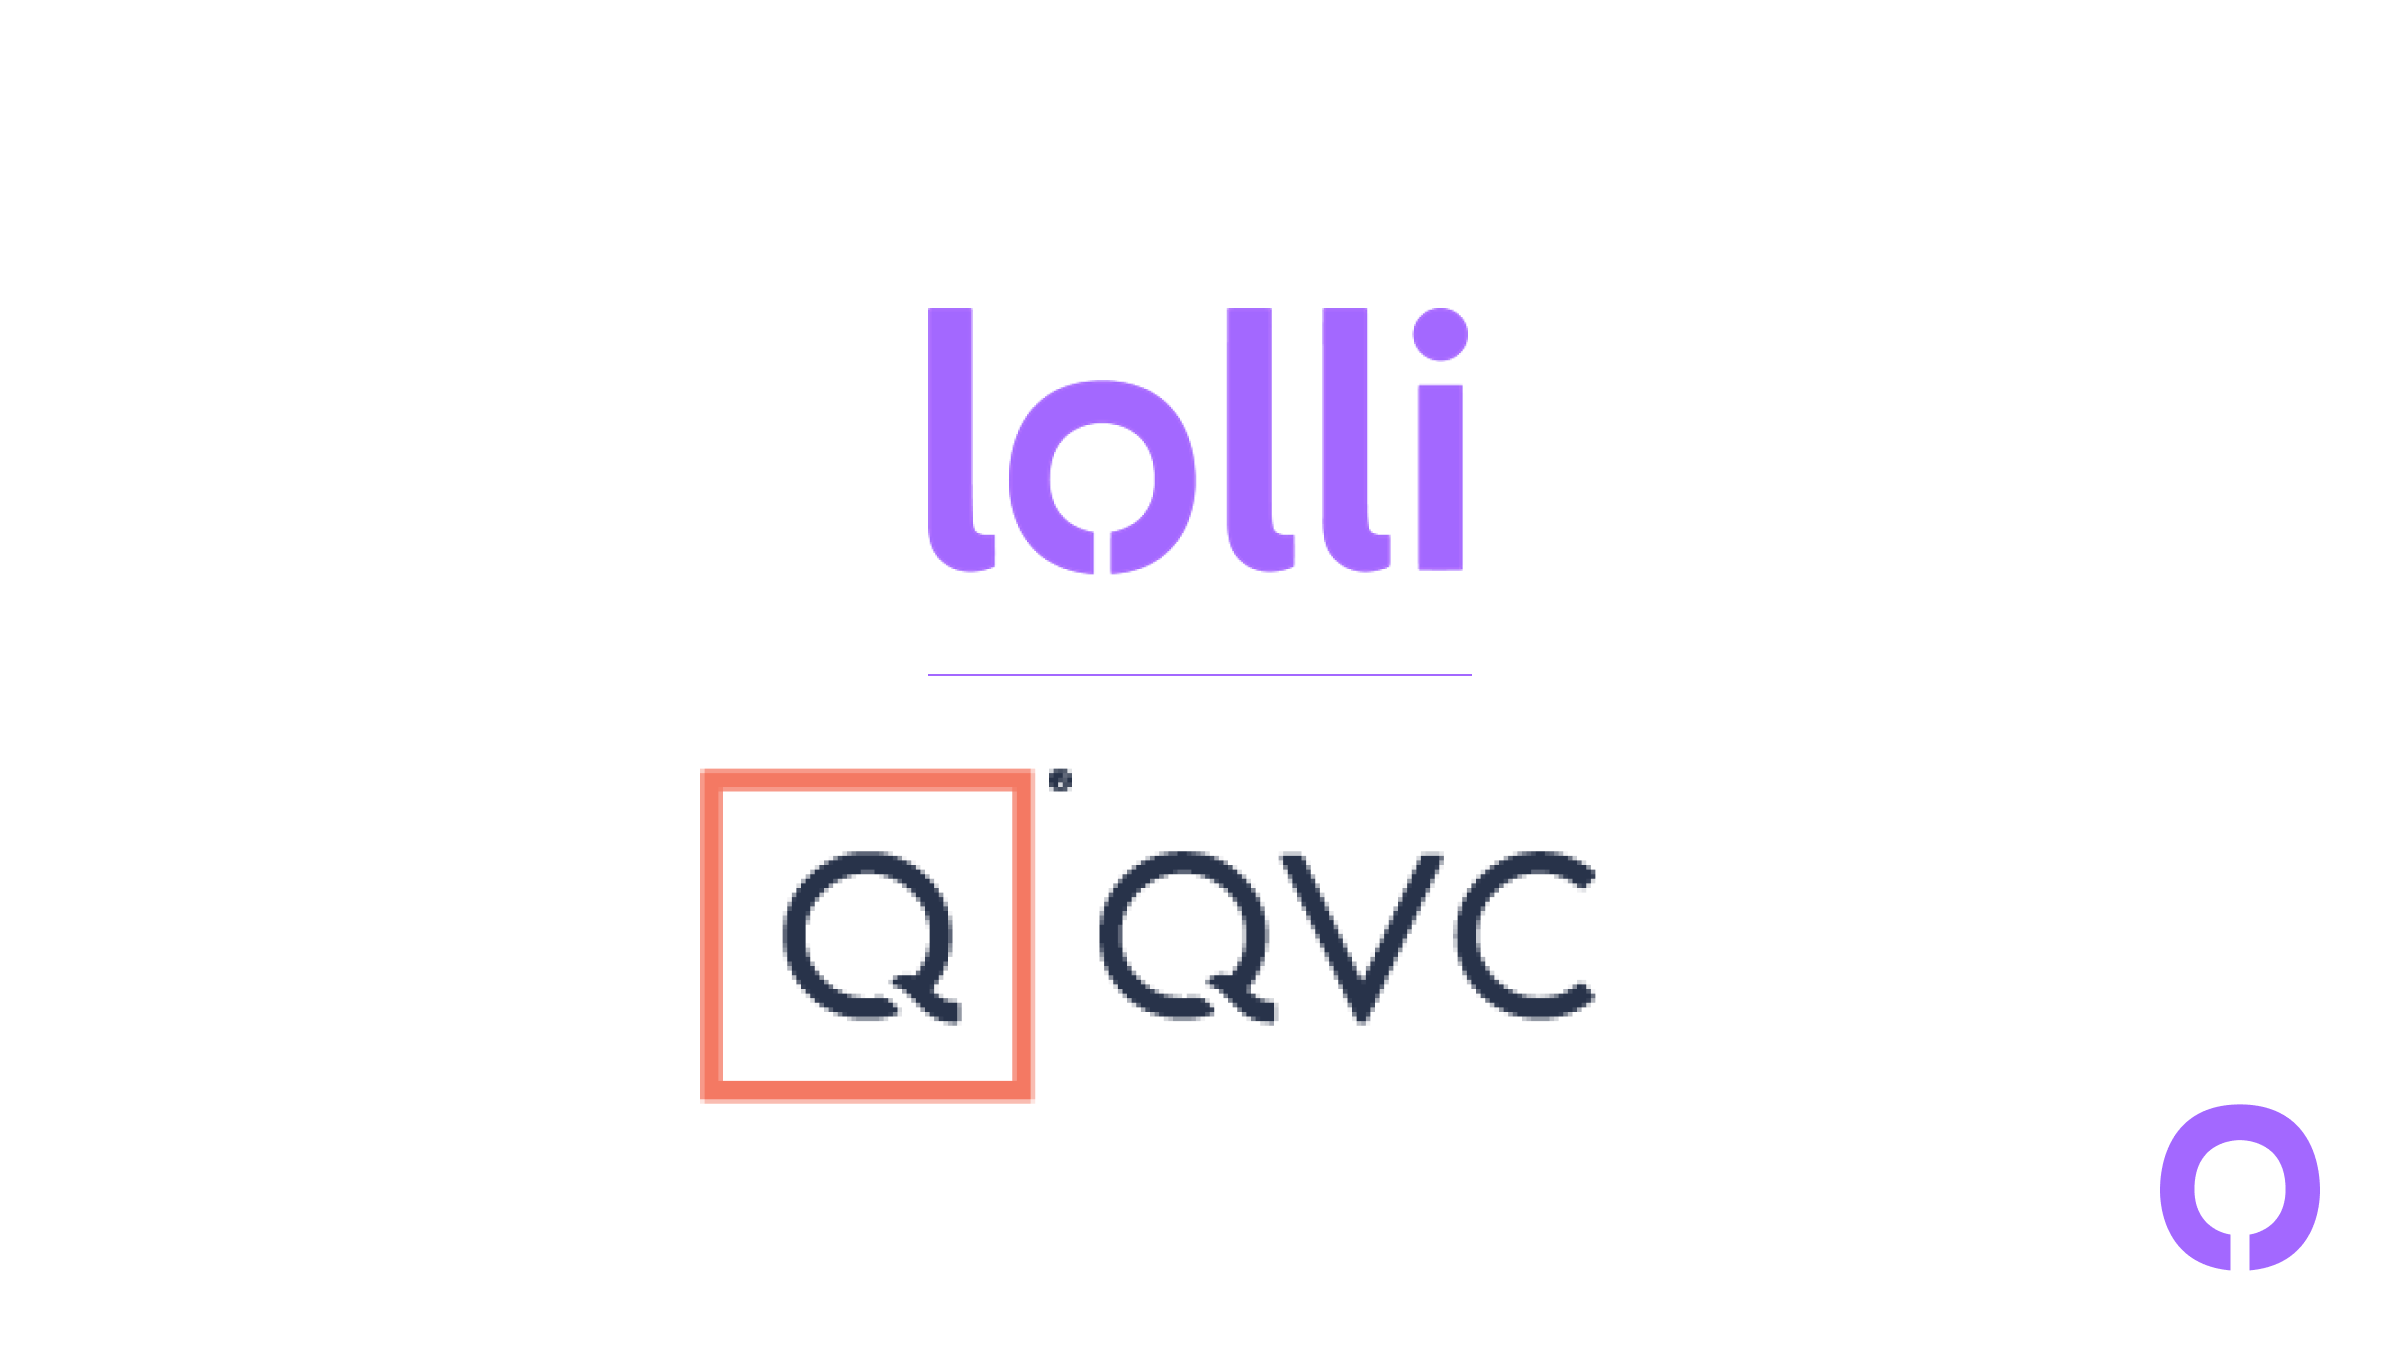 QVC is Now on Lolli!